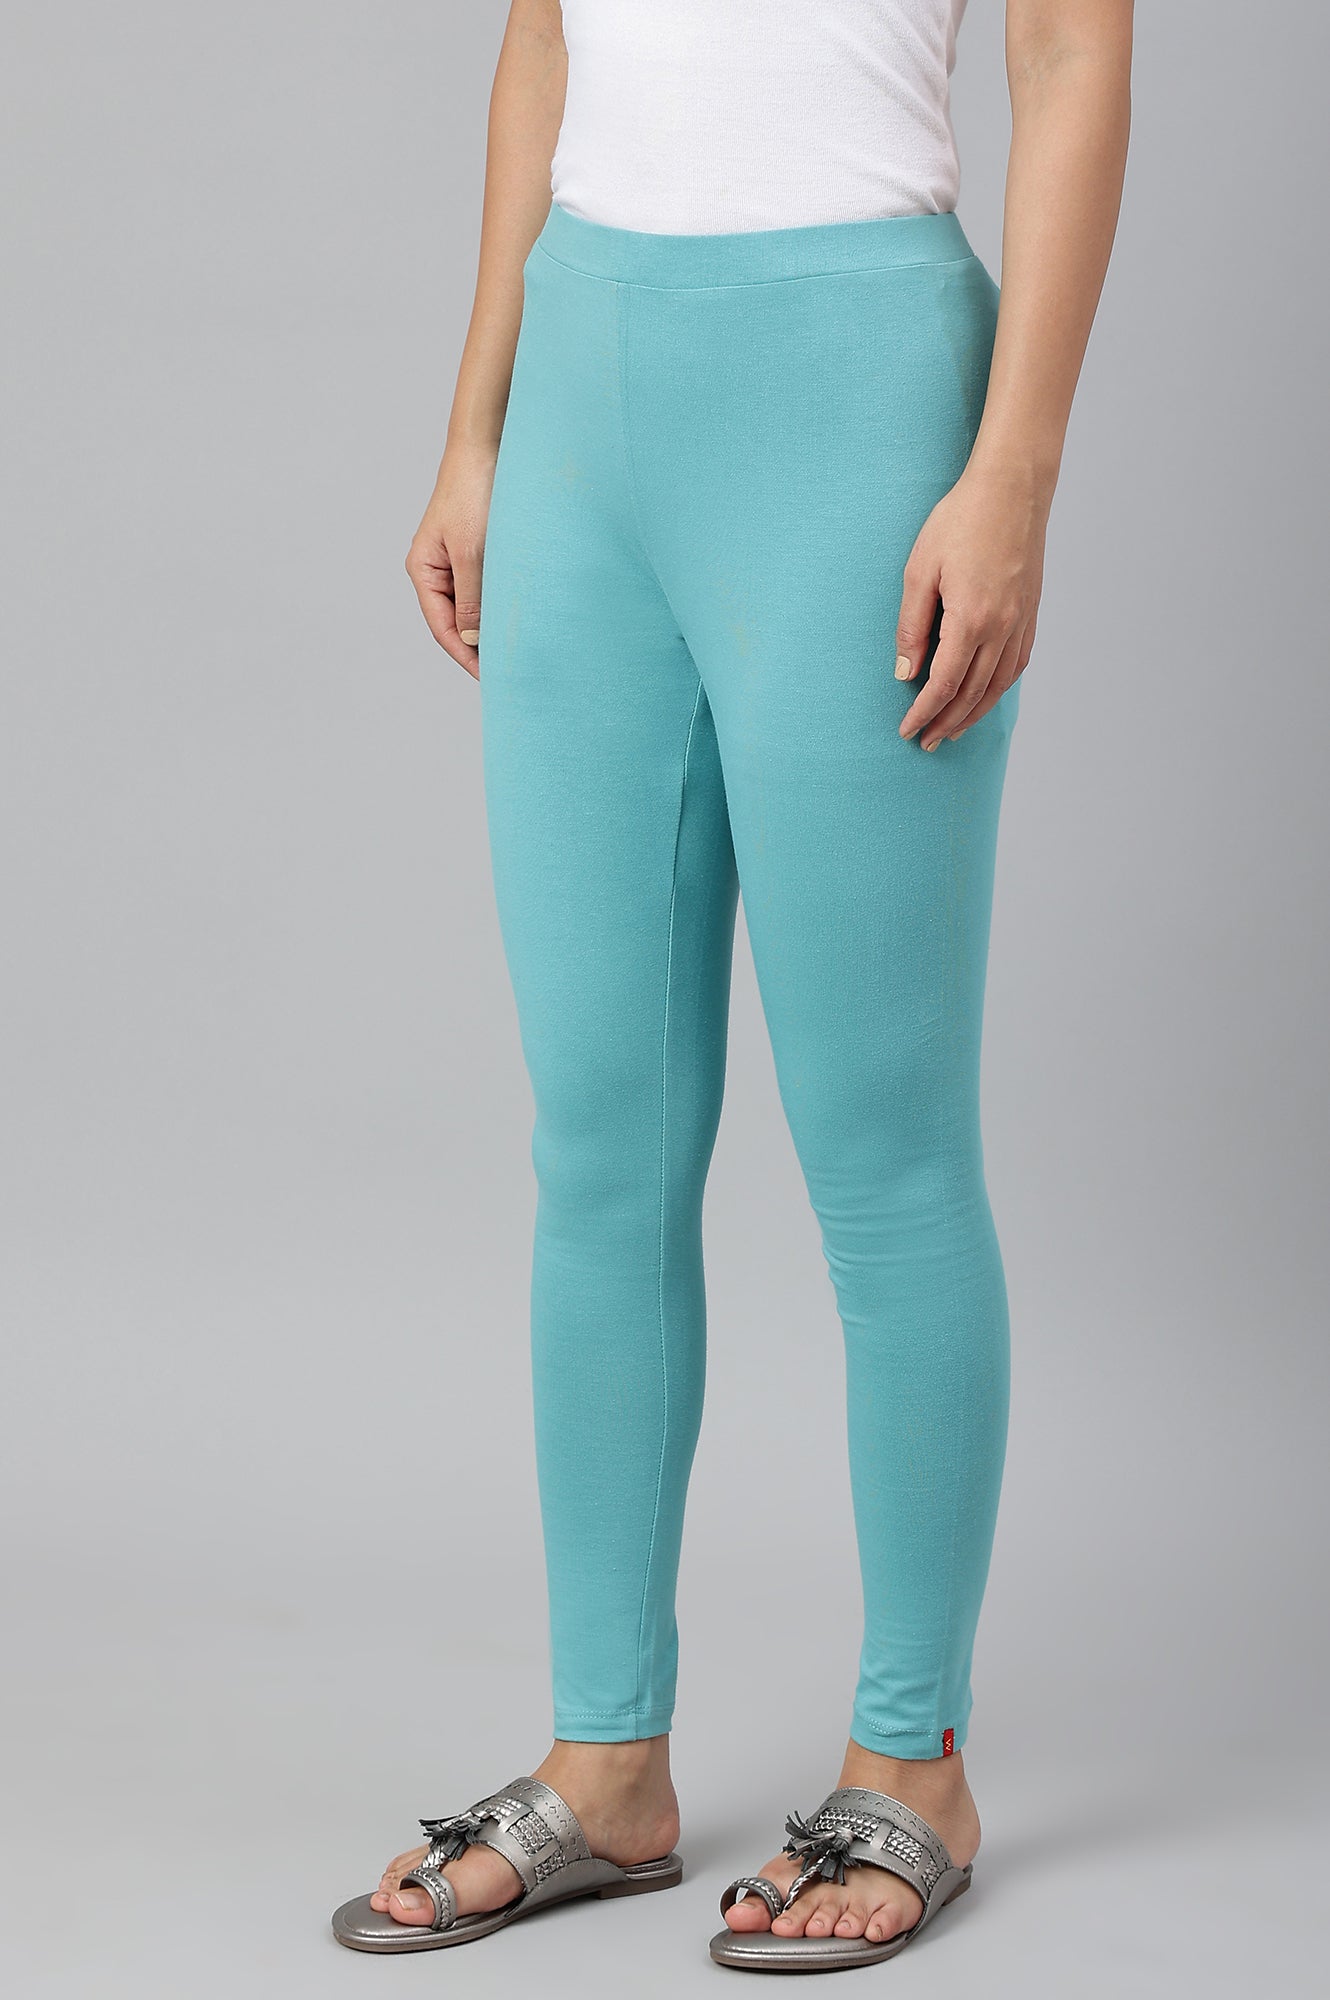 Light Blue Solid Knitted Women Tights